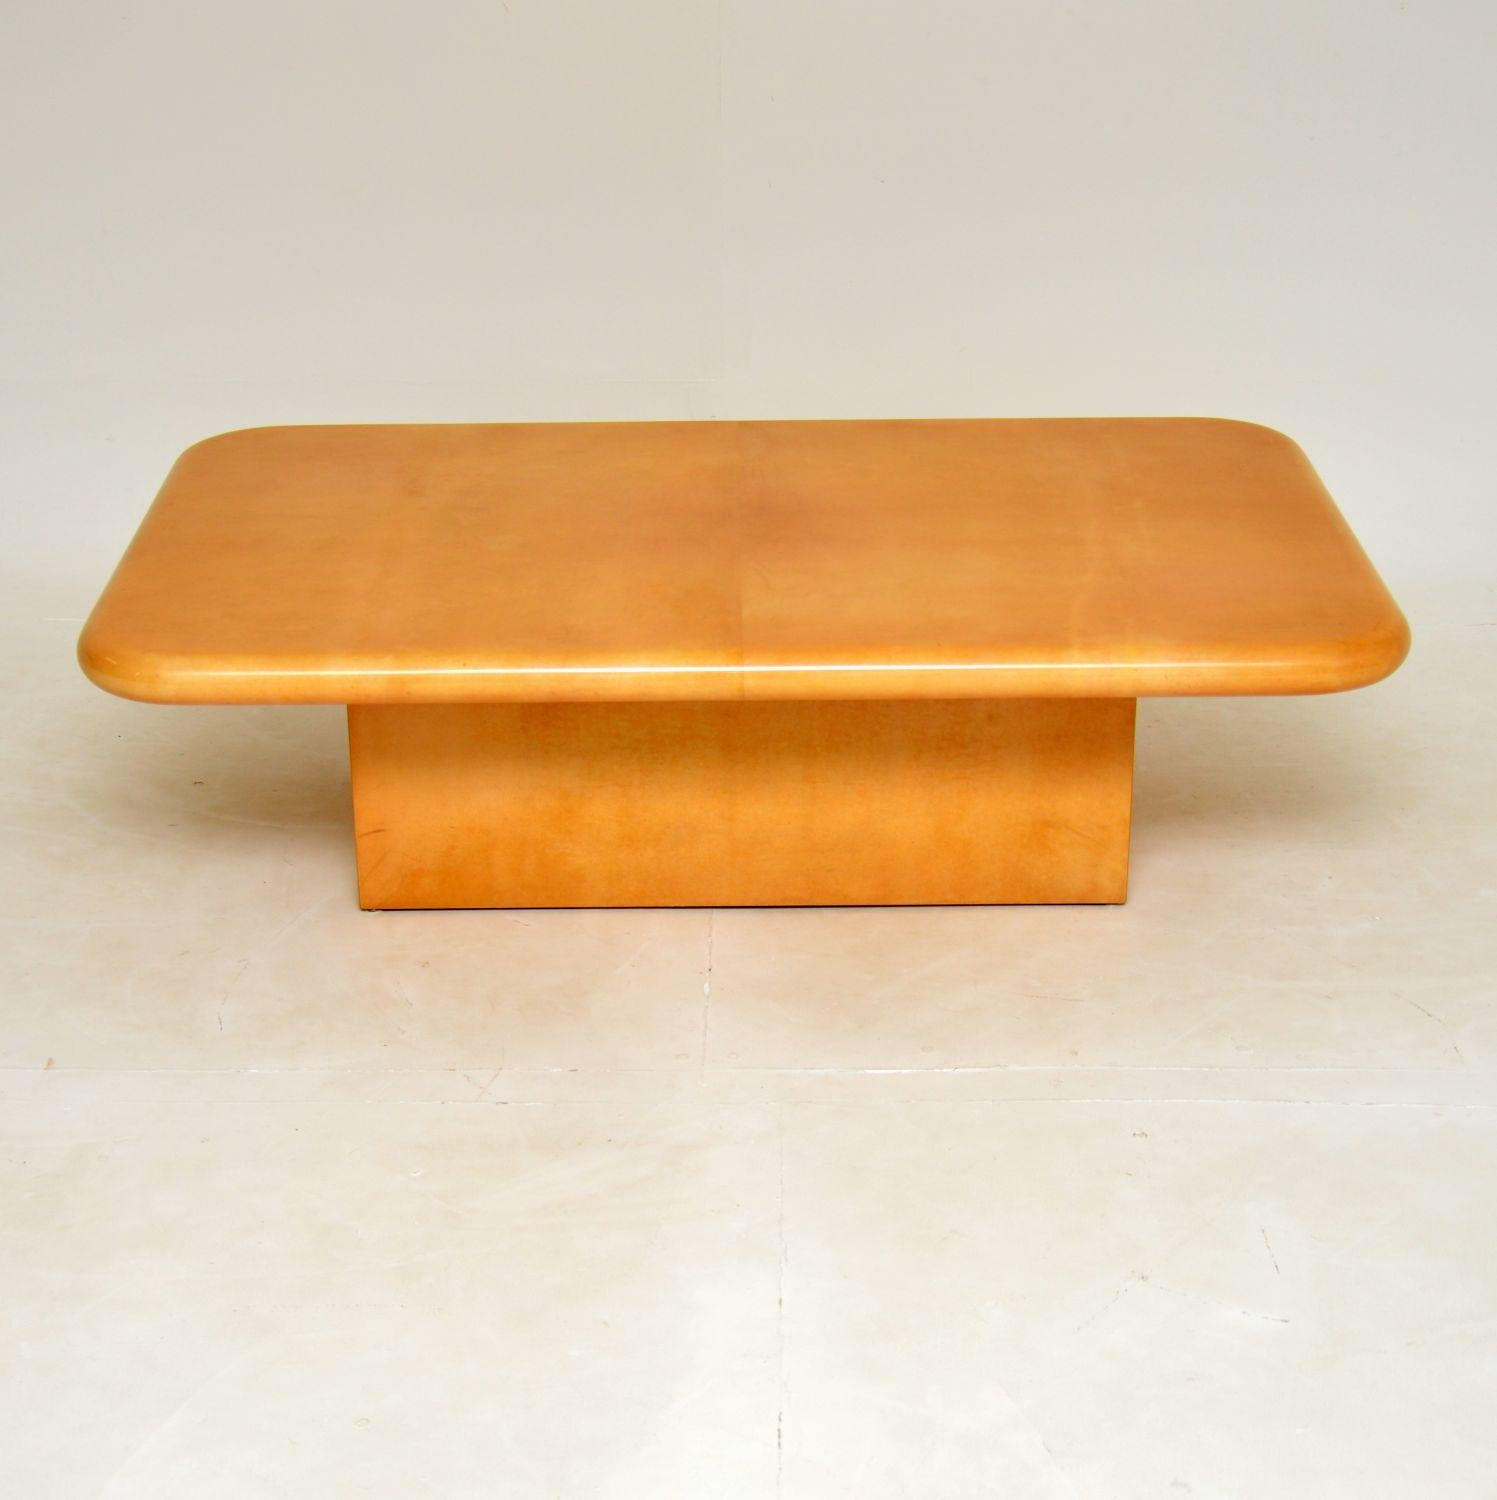 A superb original Aldo Tura large coffee table in lacquered goatskin parchment. This was made in Italy, it dates from the 1970’s.

It is a great size, very large and impressive. The quality as with all Aldo Tura designs is excellent, this has